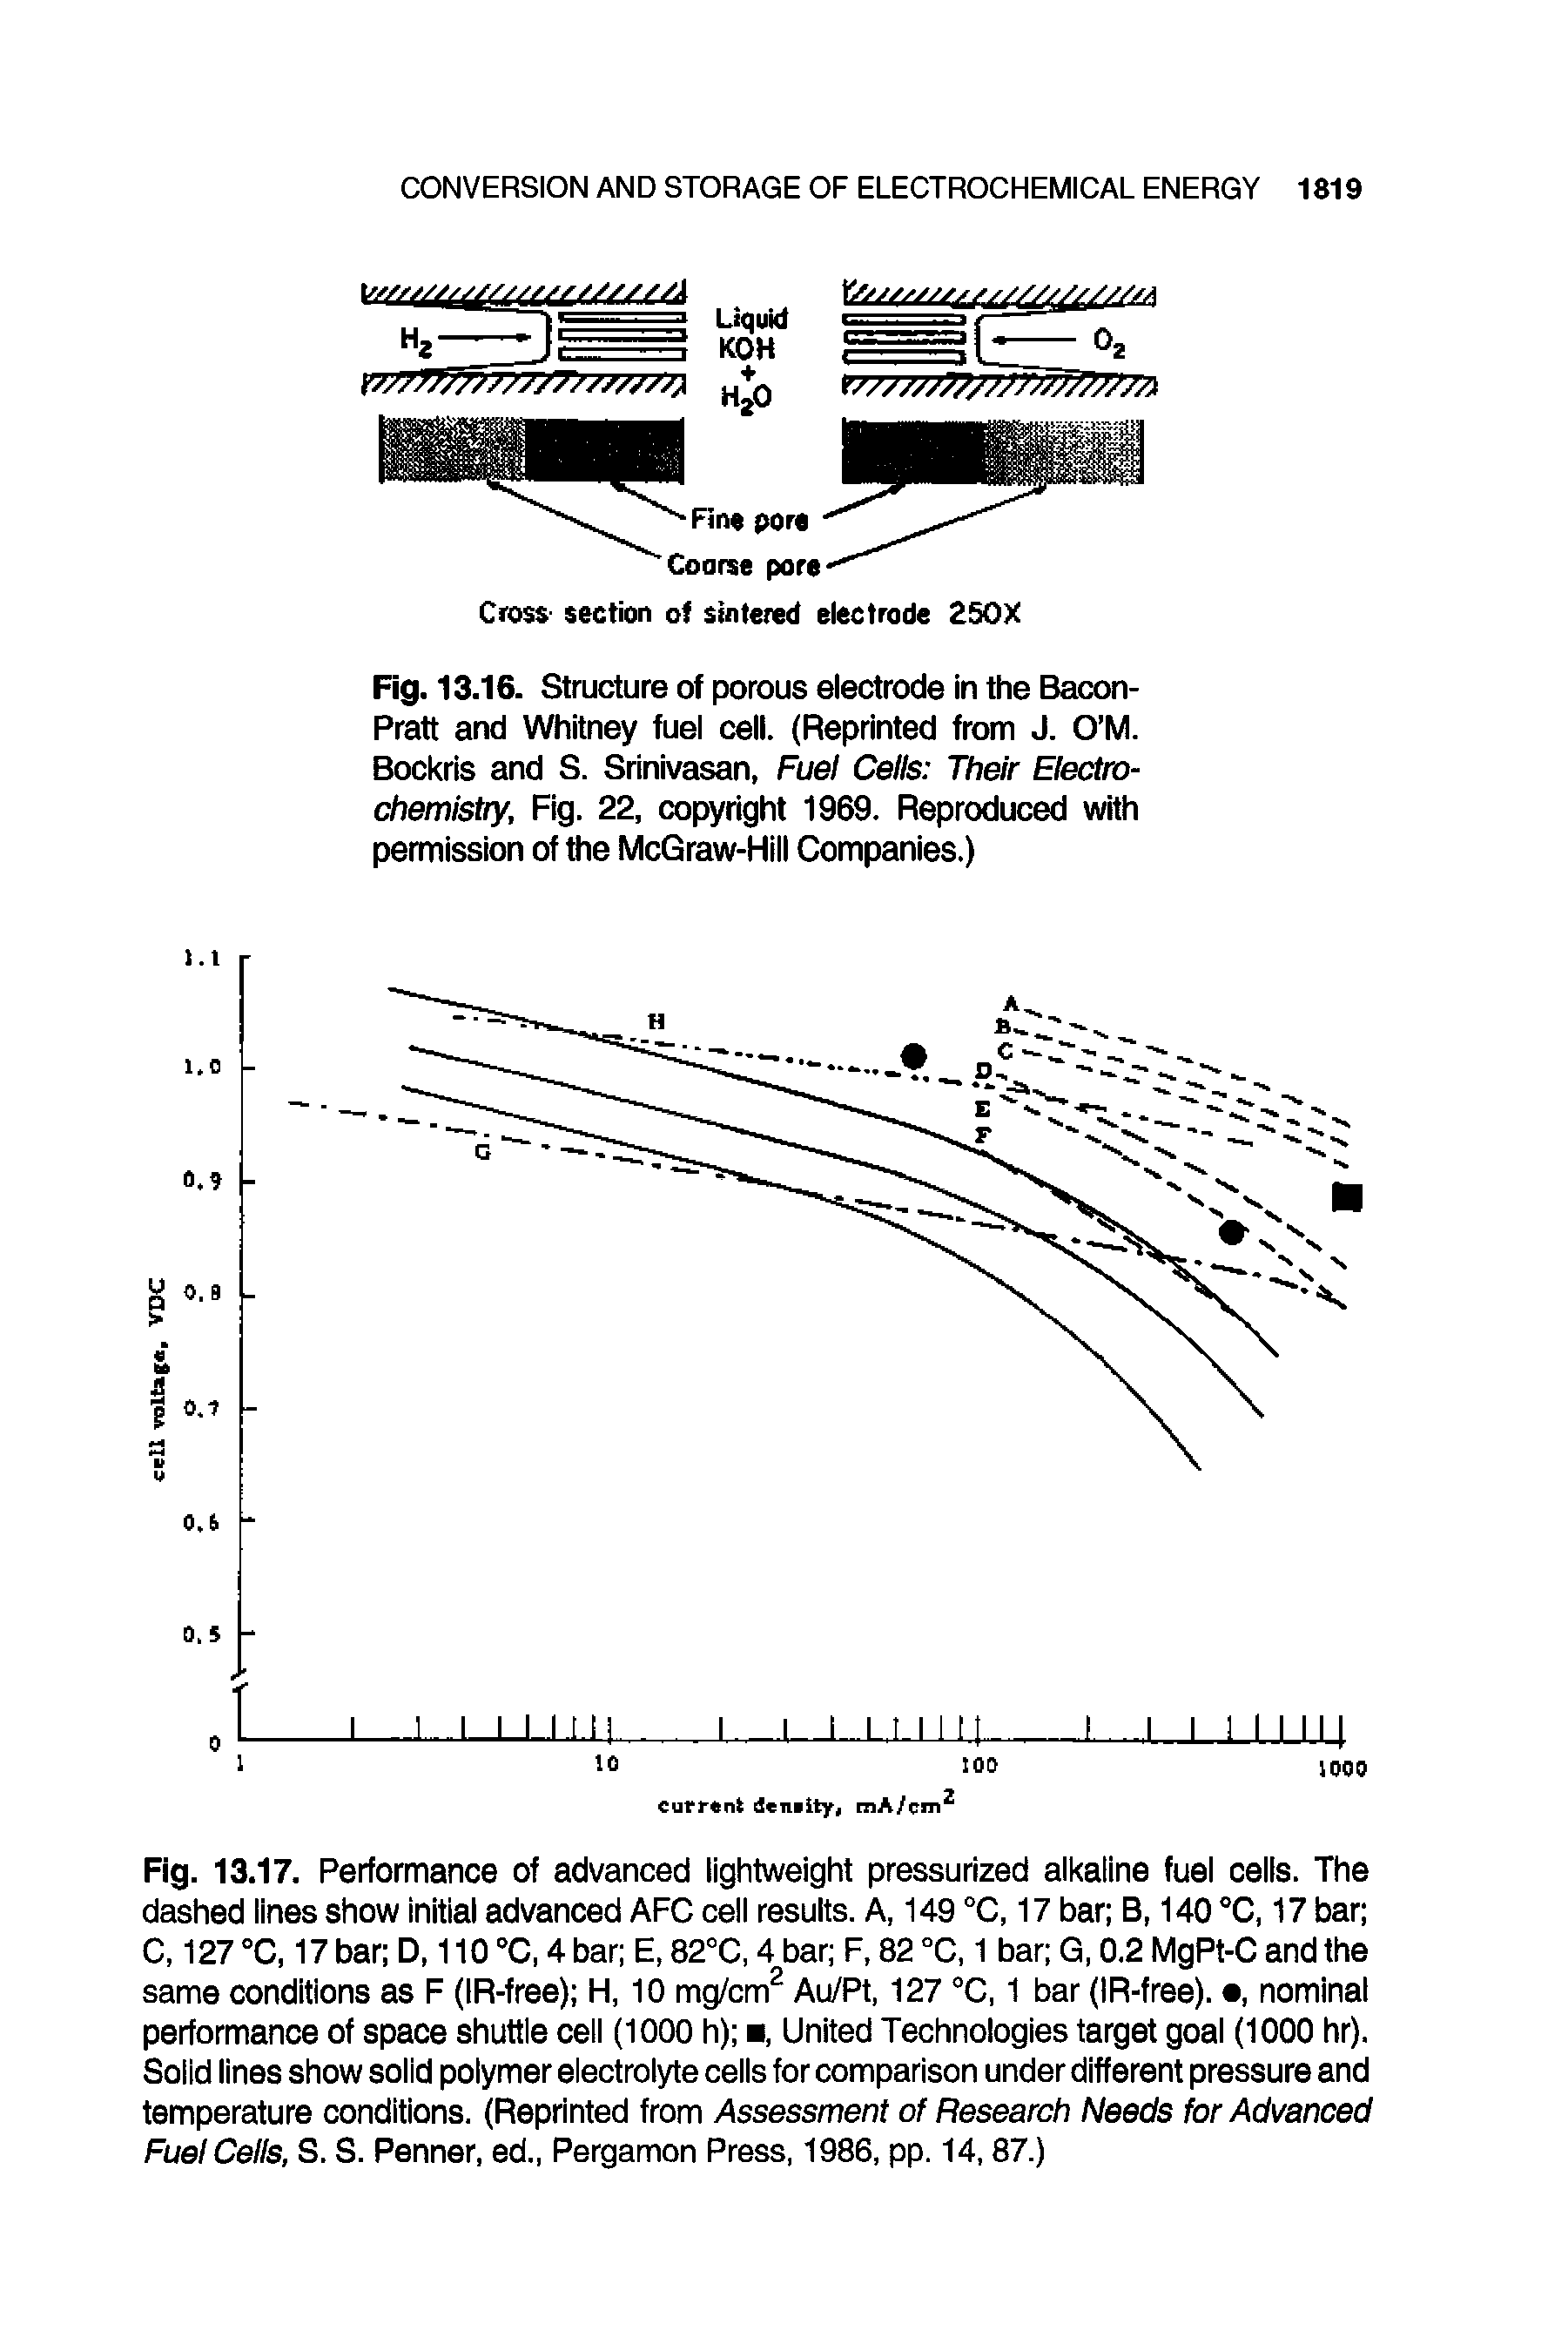 Fig. 13.16. Structure of porous electrode in the Bacon-Pratt and Whitney fuel cell. (Reprinted from J. O M. Bockris and S. Srinivasan, Fuel Cells Their Electrochemistry, Fig. 22, copyright 1969. Reproduced with permission of the McGraw-Hill Companies.)...